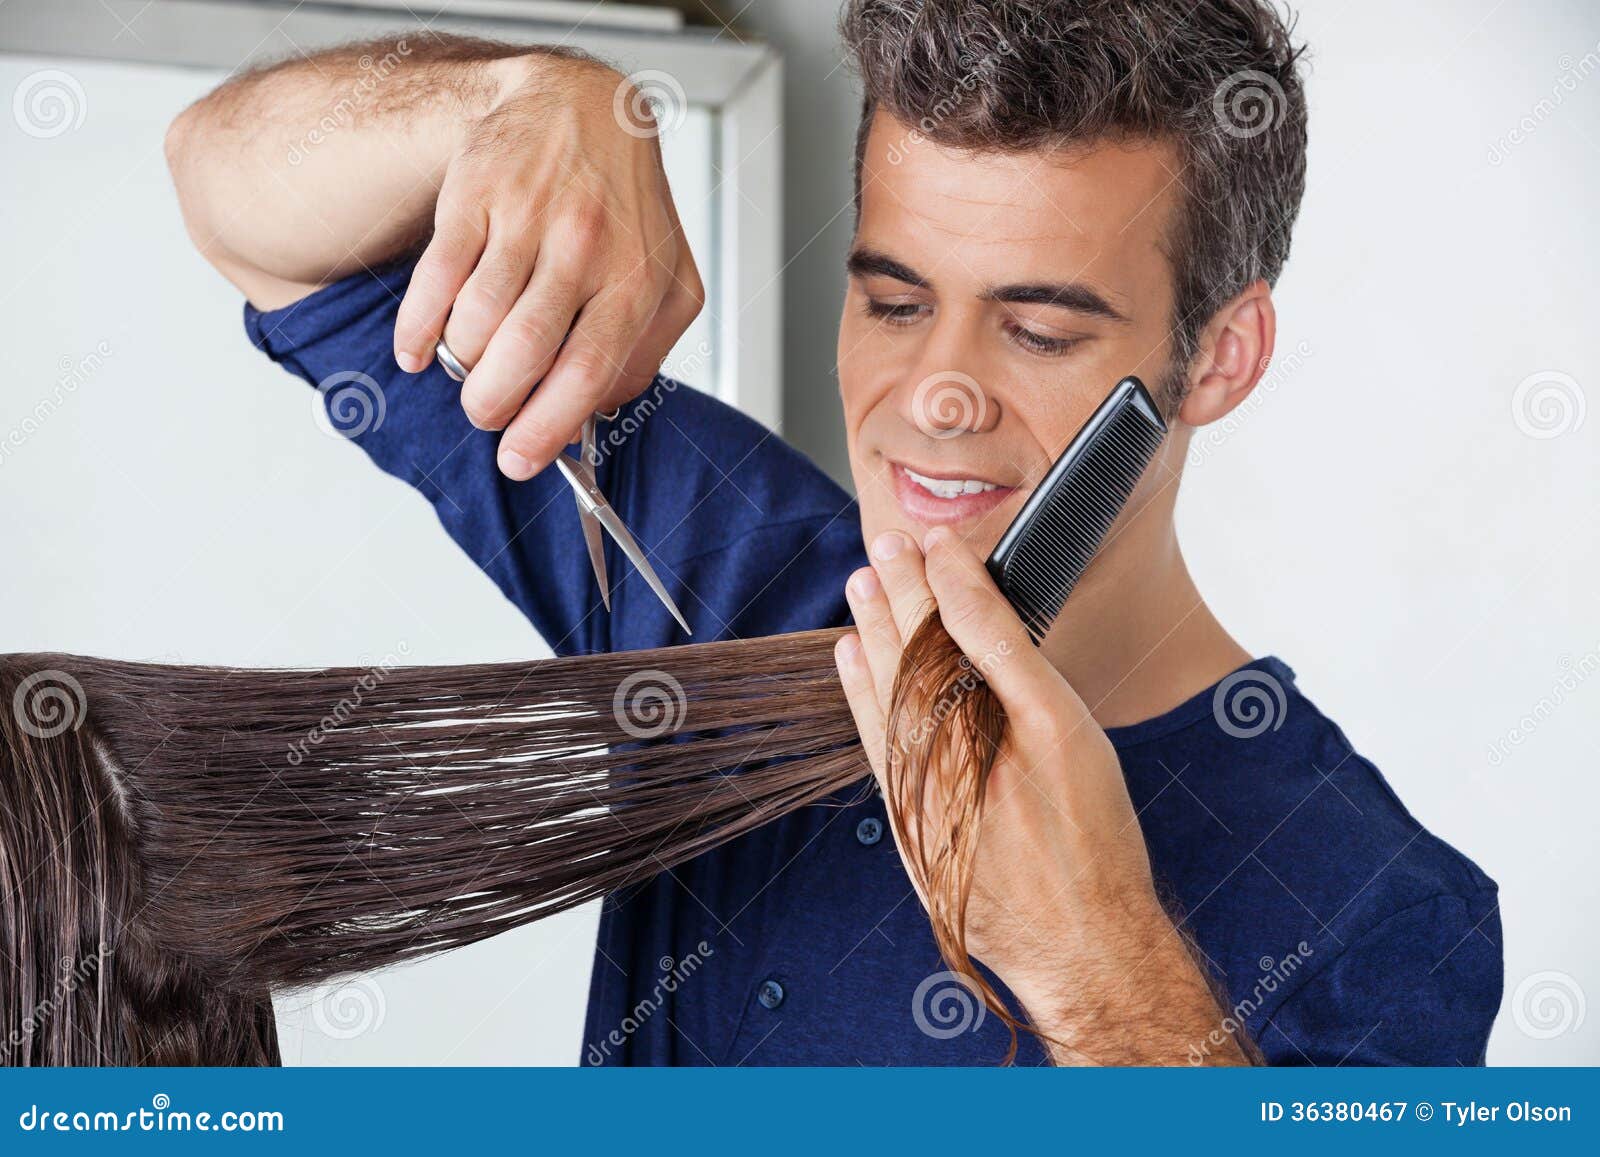 Hairdresser Cutting Client's Hair Royalty Free Stock Photography